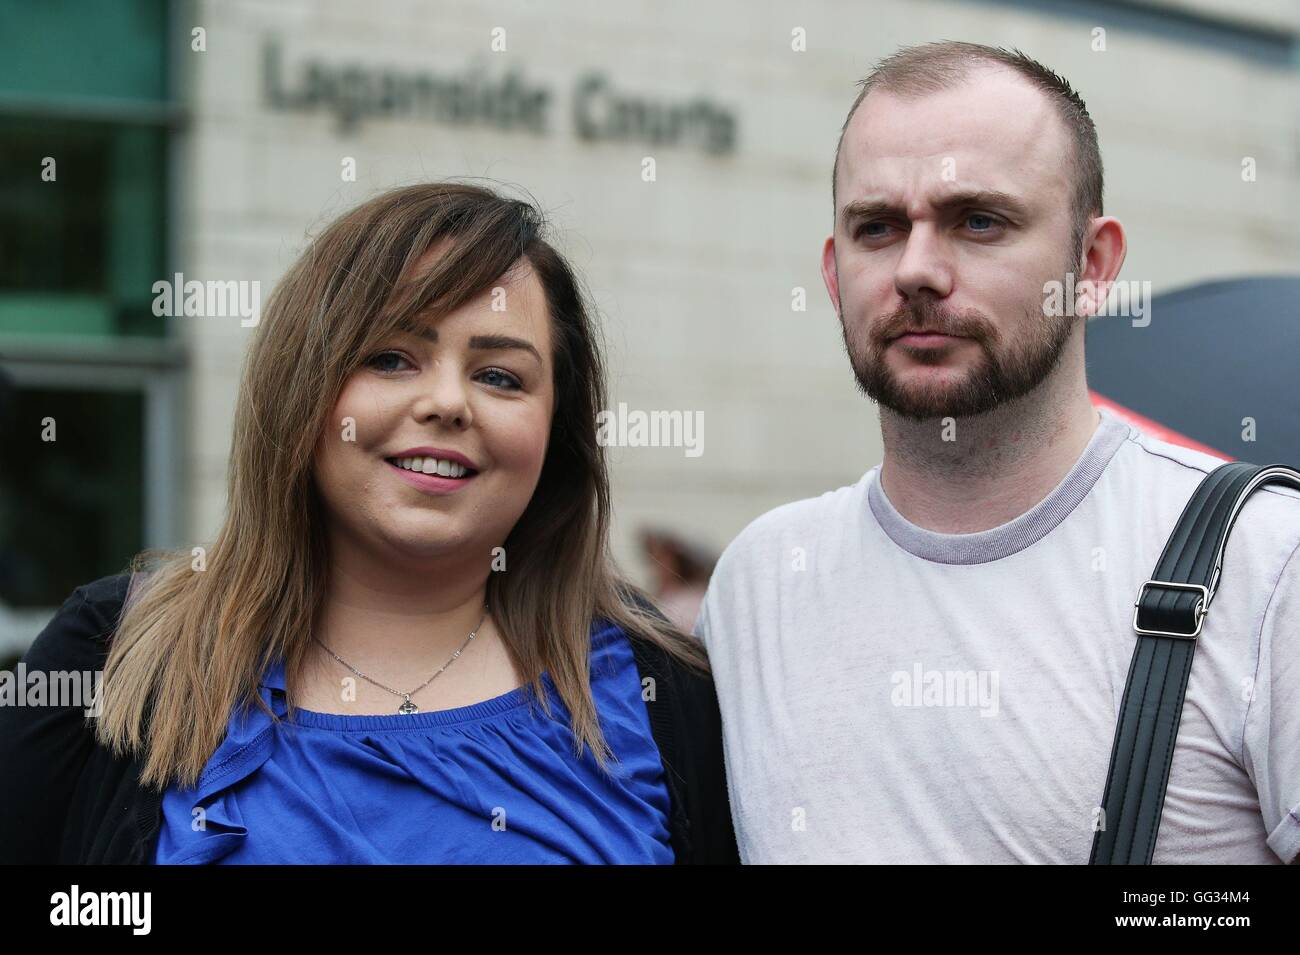 Joanne Meadows and Leonard Collins, joint owners of a dog called Hank, arrive at Laganside Courts in Belfast, after a judge ruled that their dog, seized by Belfast City Council under dangerous dogs legislation, is able to return home. Stock Photo